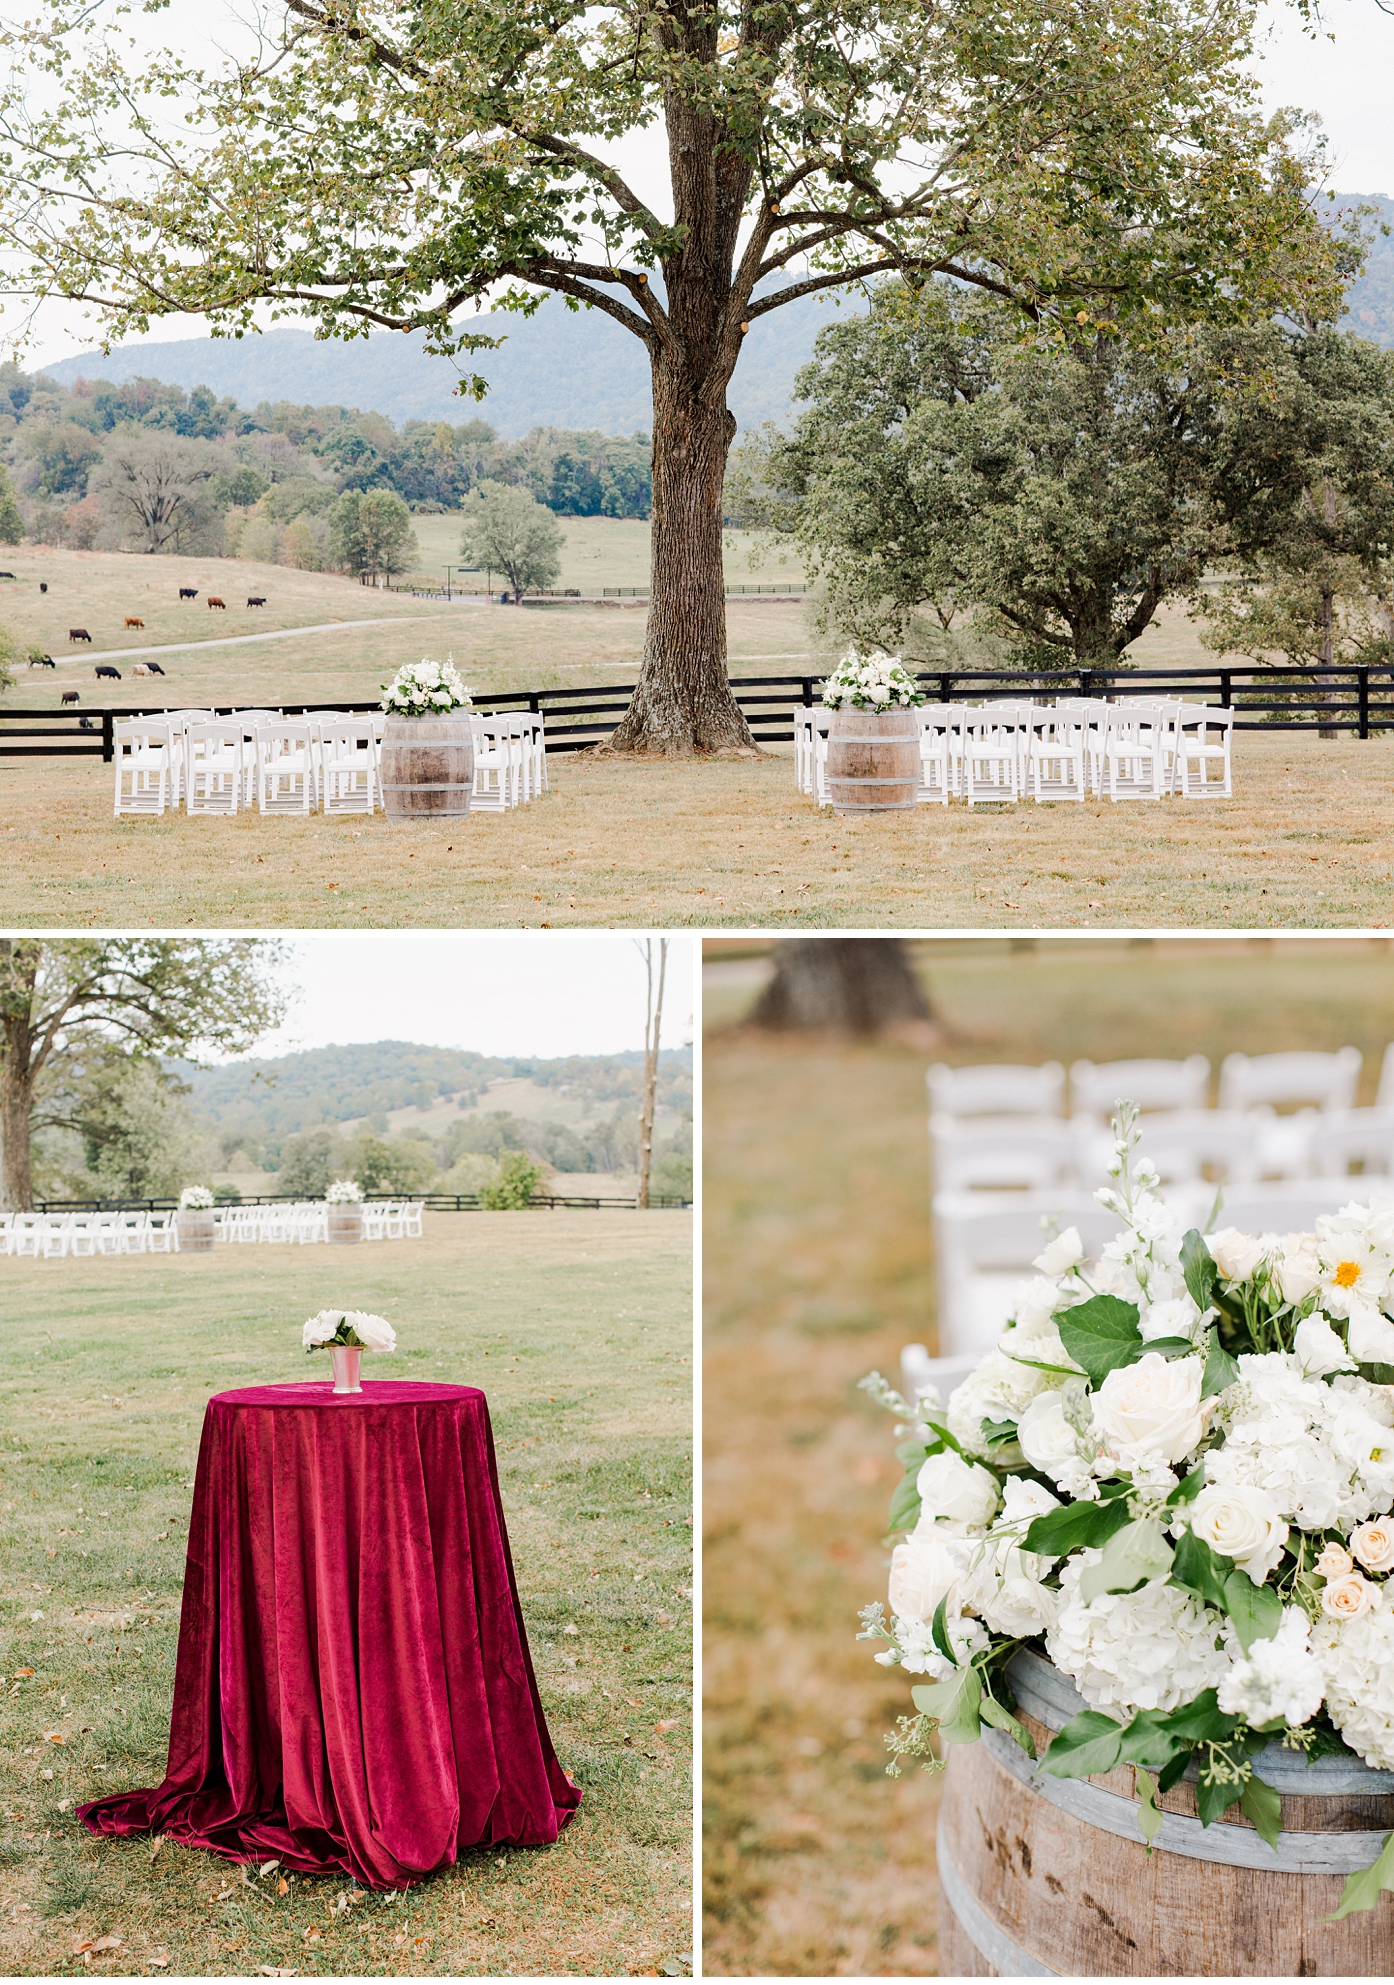 20's Vintage Inspired Wedding at Marriott Ranch in Hume Virginia by Alisandra Photography